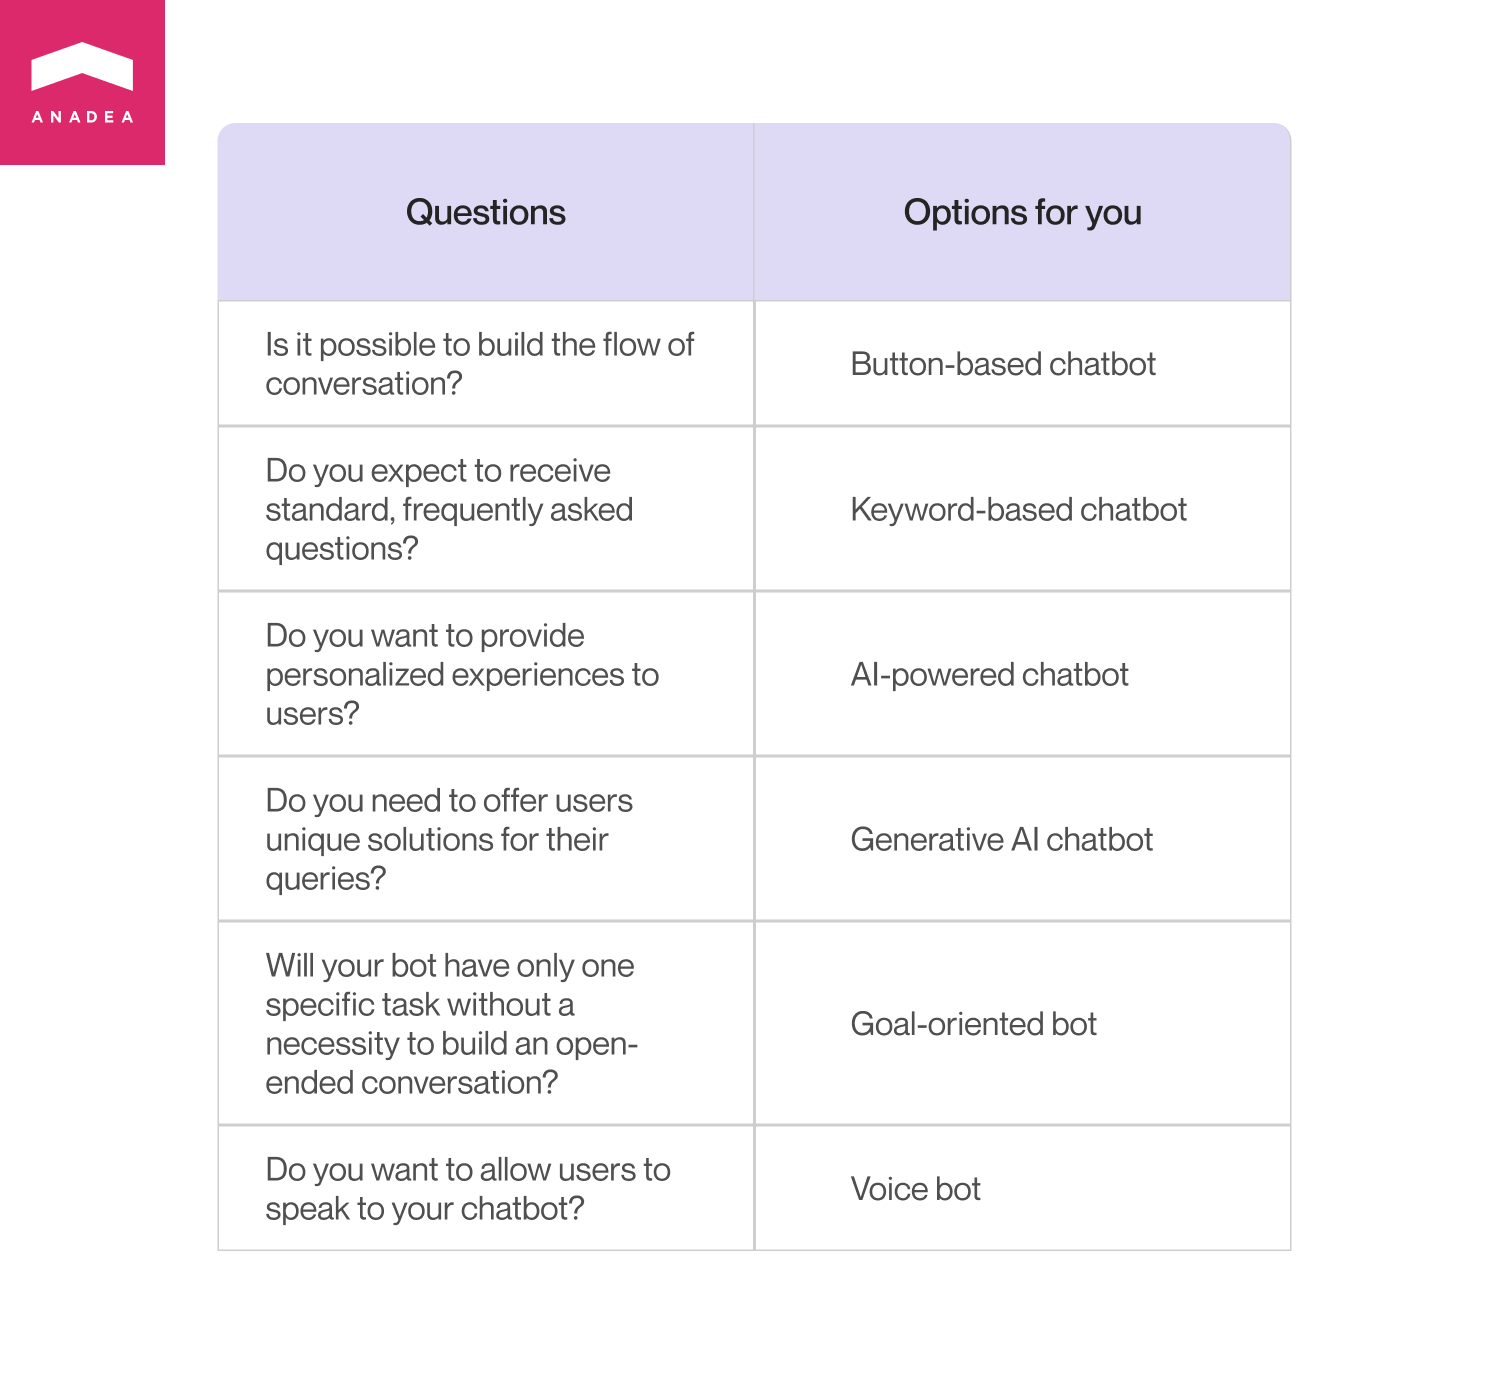 A table presenting different types of chatbots based on specific needs. The table has two columns. The first column lists questions to consider, and the second column suggests the type of chatbot suitable for that need. Questions and their corresponding options are as follows: 'Is it possible to build the flow of conversation?' corresponds to 'Button-based chatbot'. 'Do you expect to receive standard, frequently asked questions?' corresponds to 'Keyword-based chatbot'. 'Do you want to provide personalized experiences to users?' corresponds to 'AI-powered chatbot'. 'Do you need to offer users unique solutions for their queries?' corresponds to 'Generative AI chatbot'. 'Will your bot have only one specific task without a necessity to build an open-ended conversation?' corresponds to 'Goal-oriented bot'. Lastly, 'Do you want to allow users to speak to your chatbot?' corresponds to 'Voice bot'.